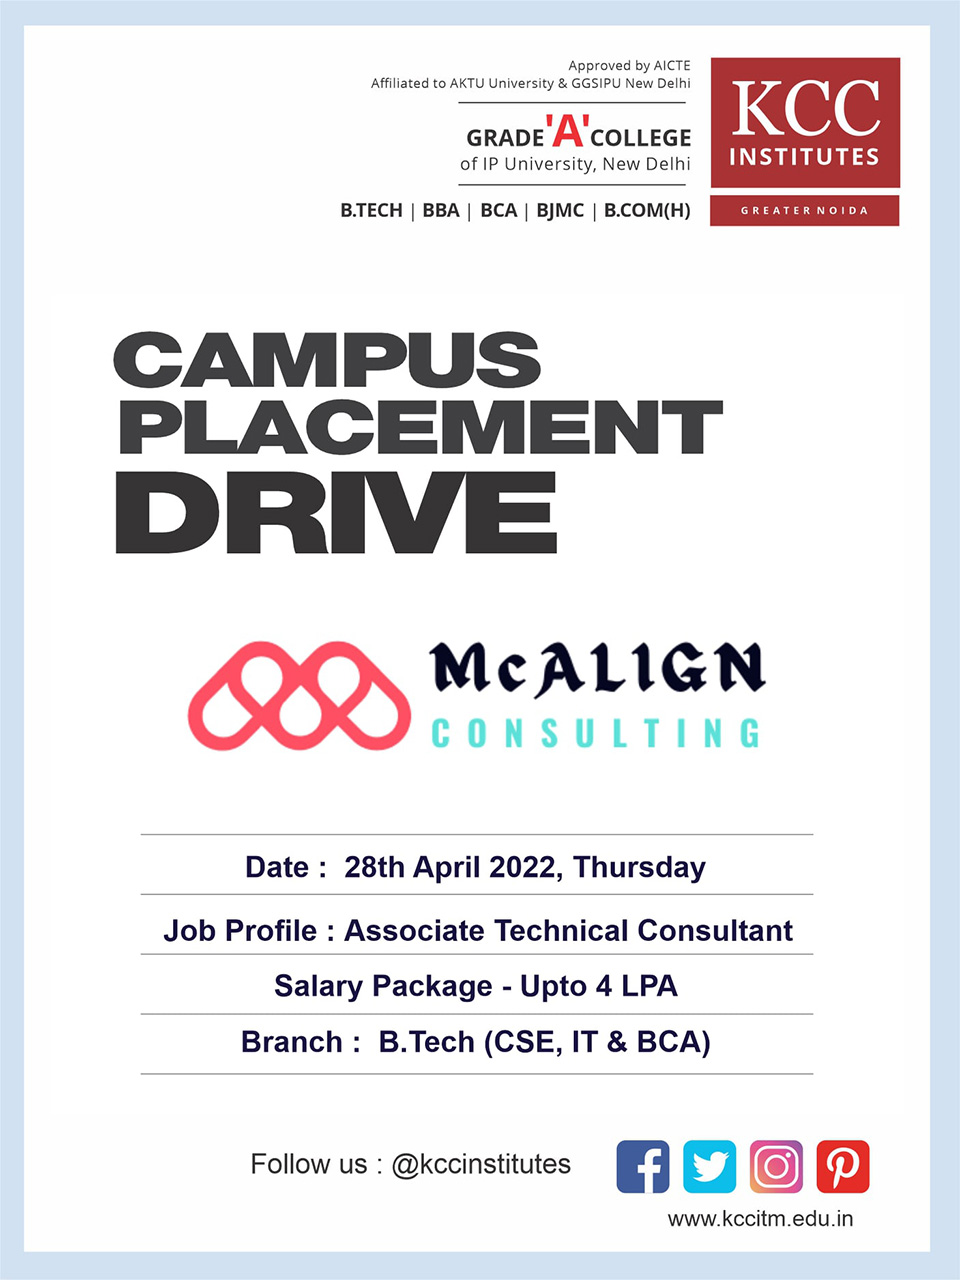 Campus Placement Drive for Mcalign Consulting